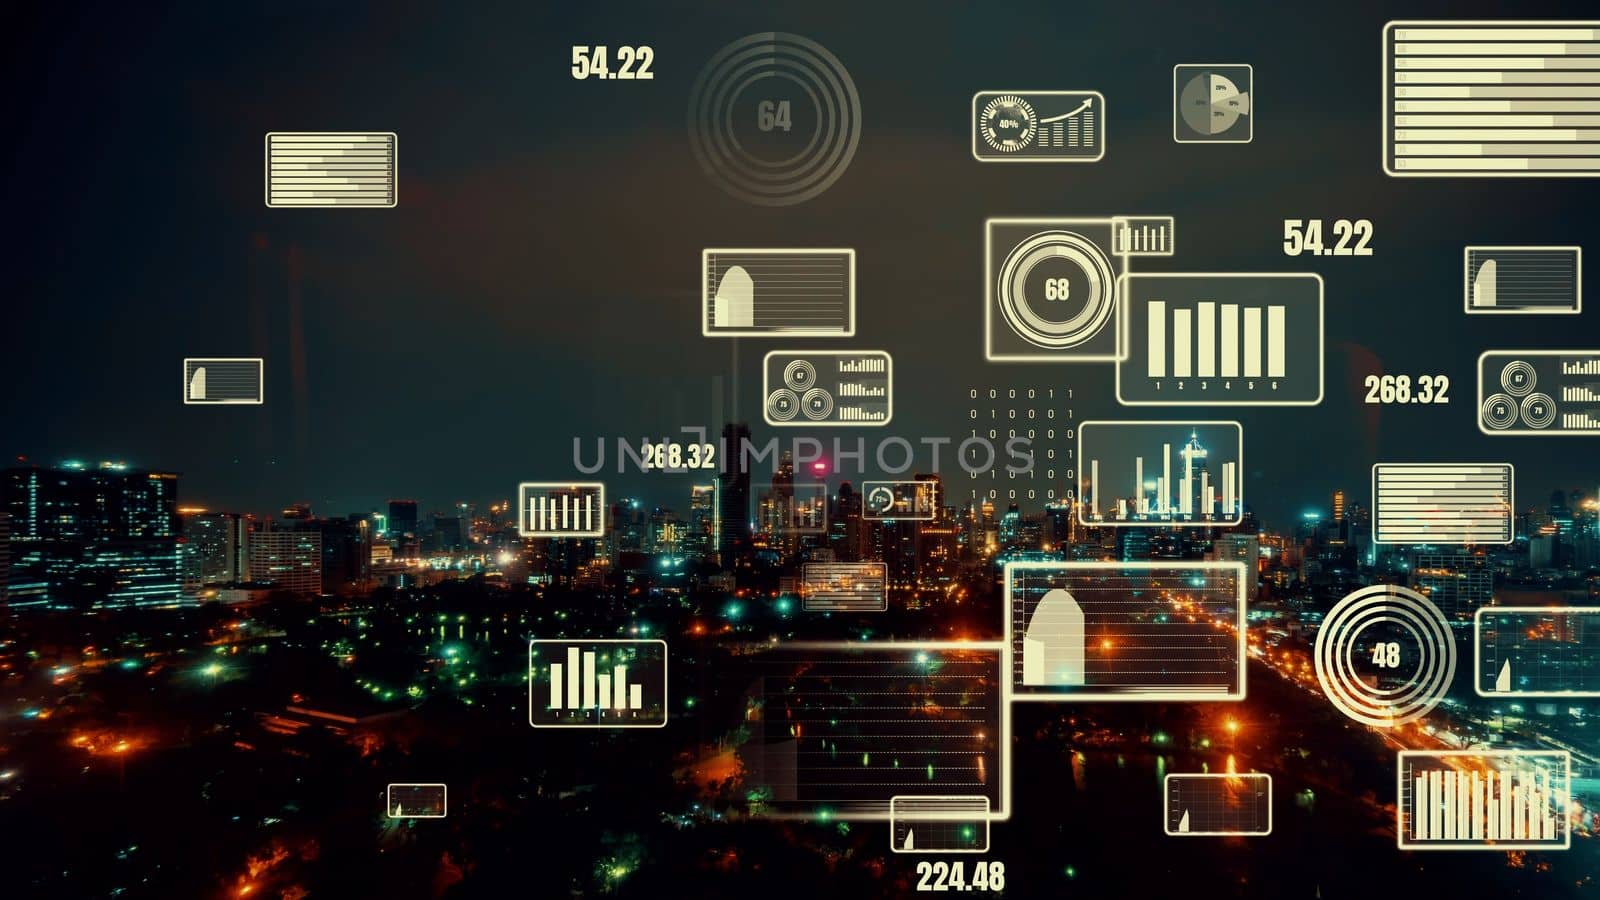 Business data analytic interface fly over smart city showing alteration future by biancoblue